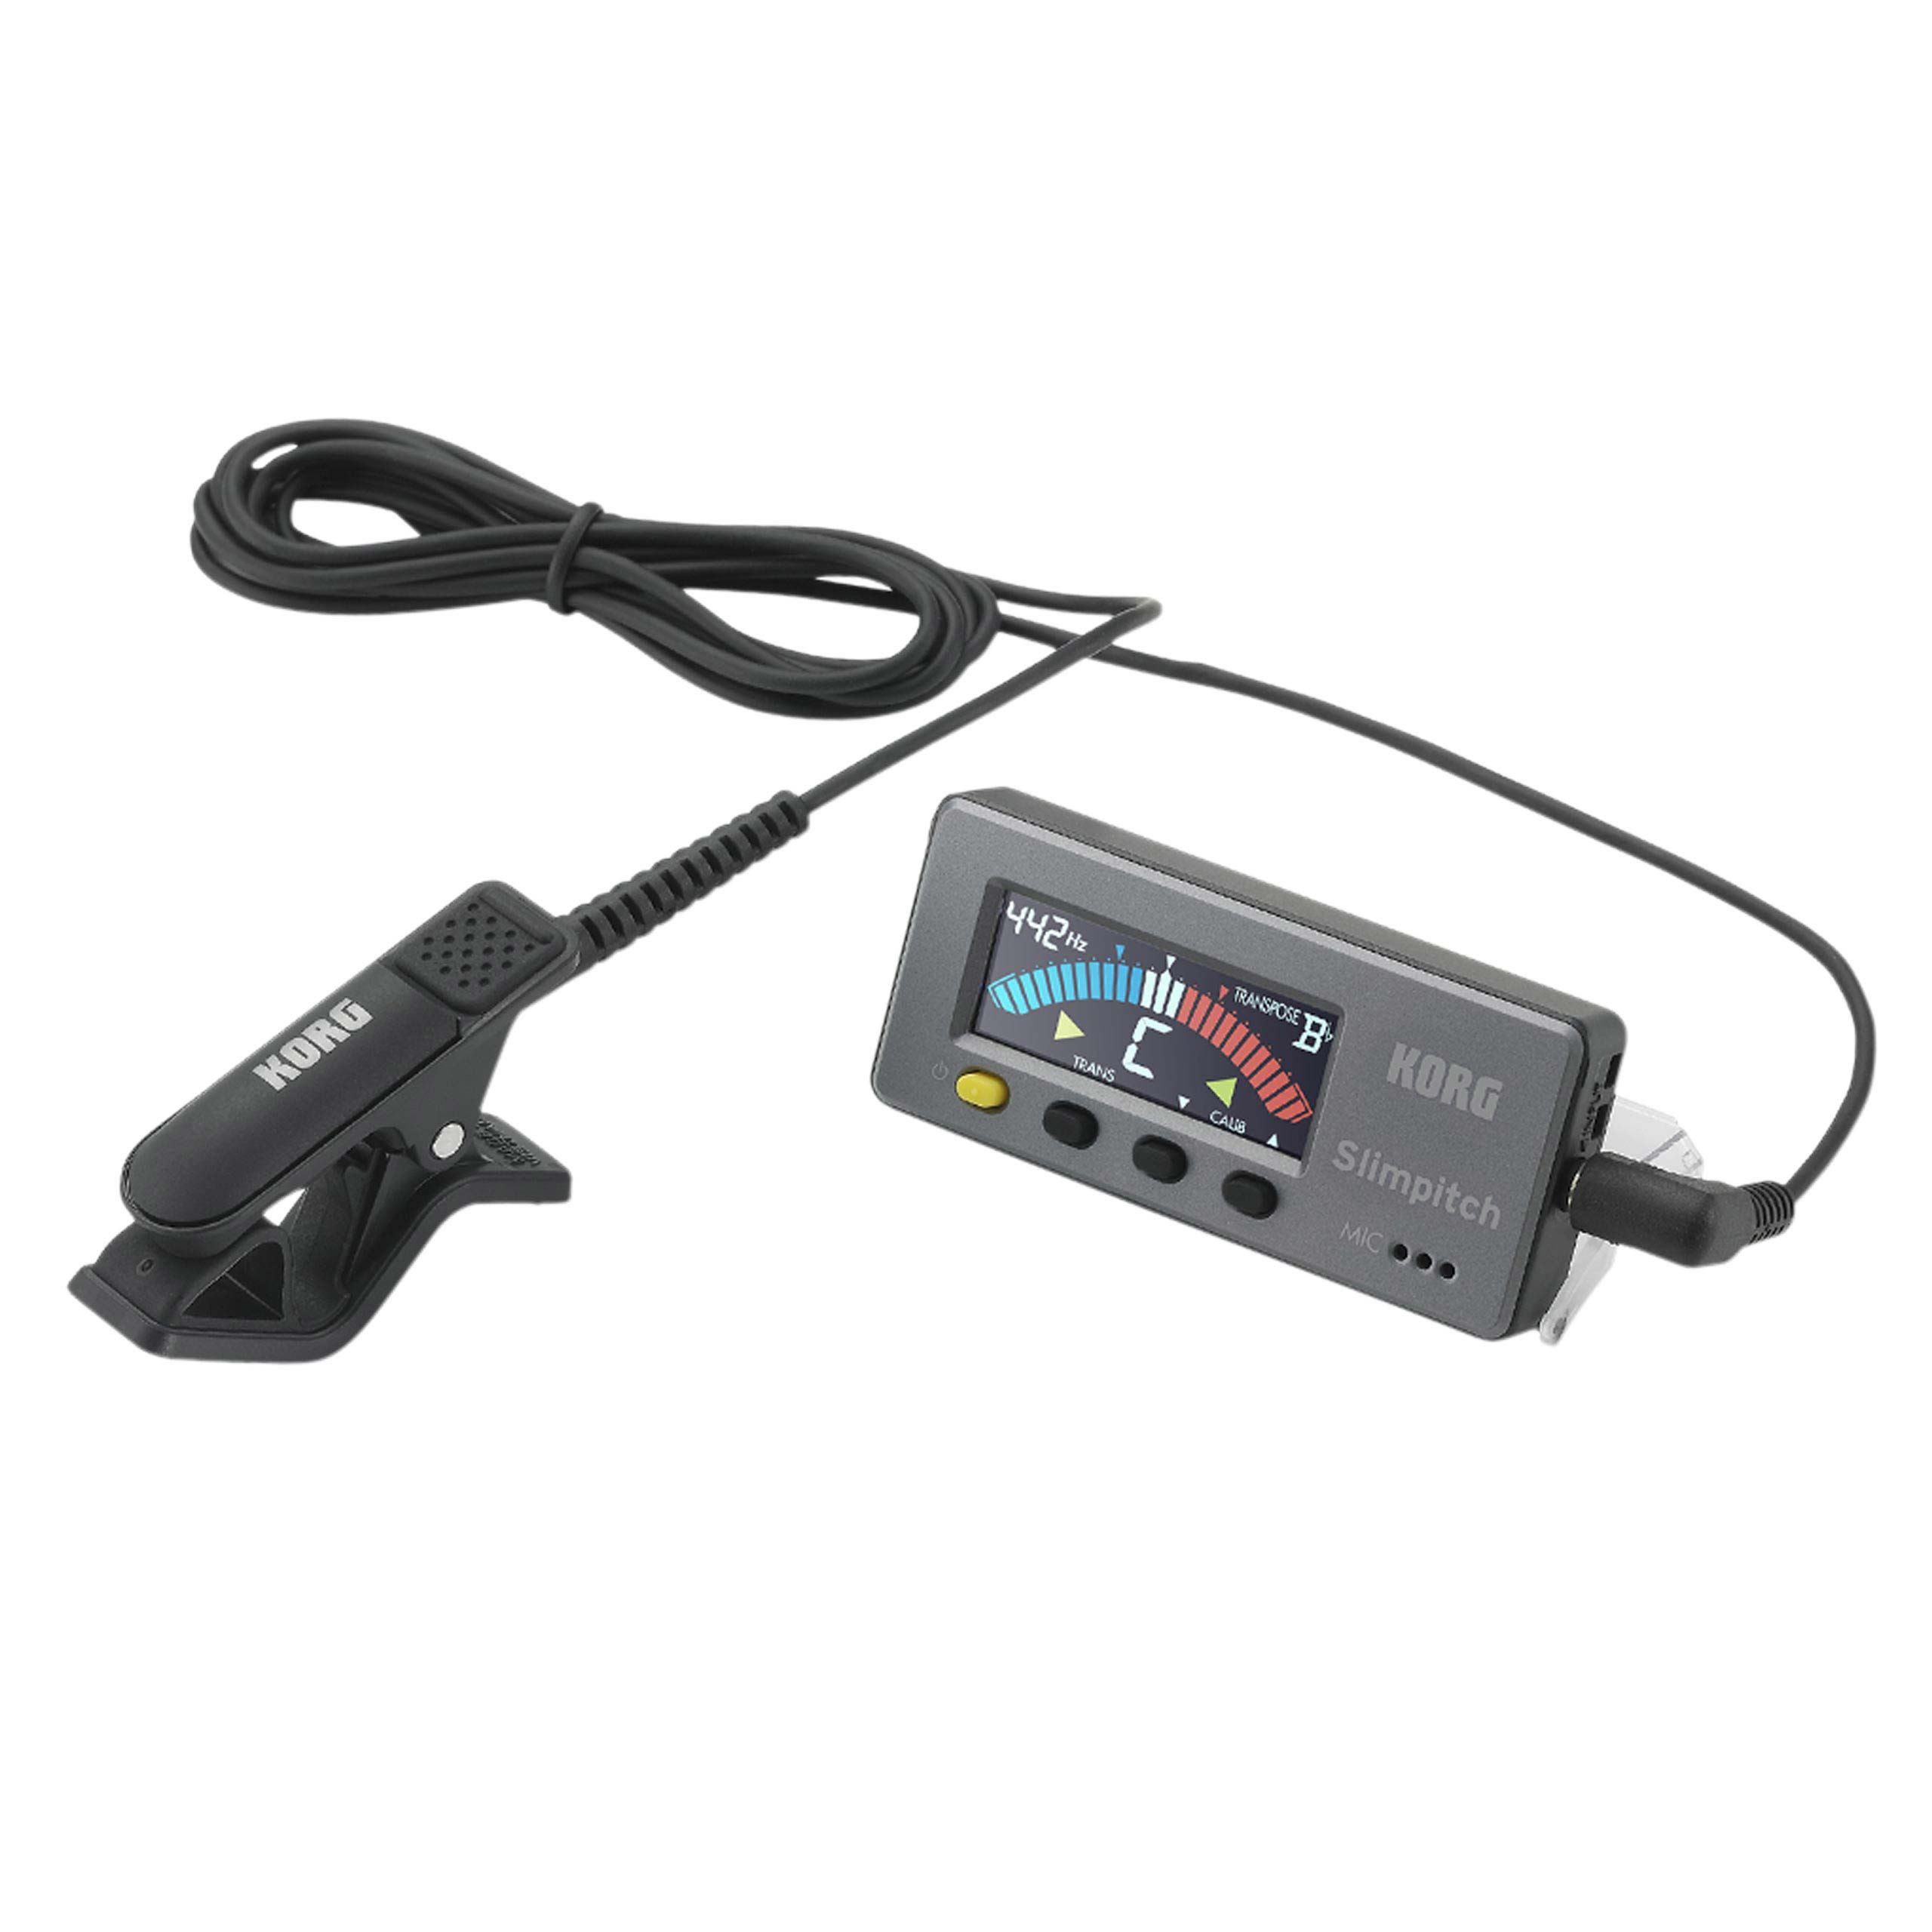 Korg Slimpitch Chromatic Tuner with Microphone in Black